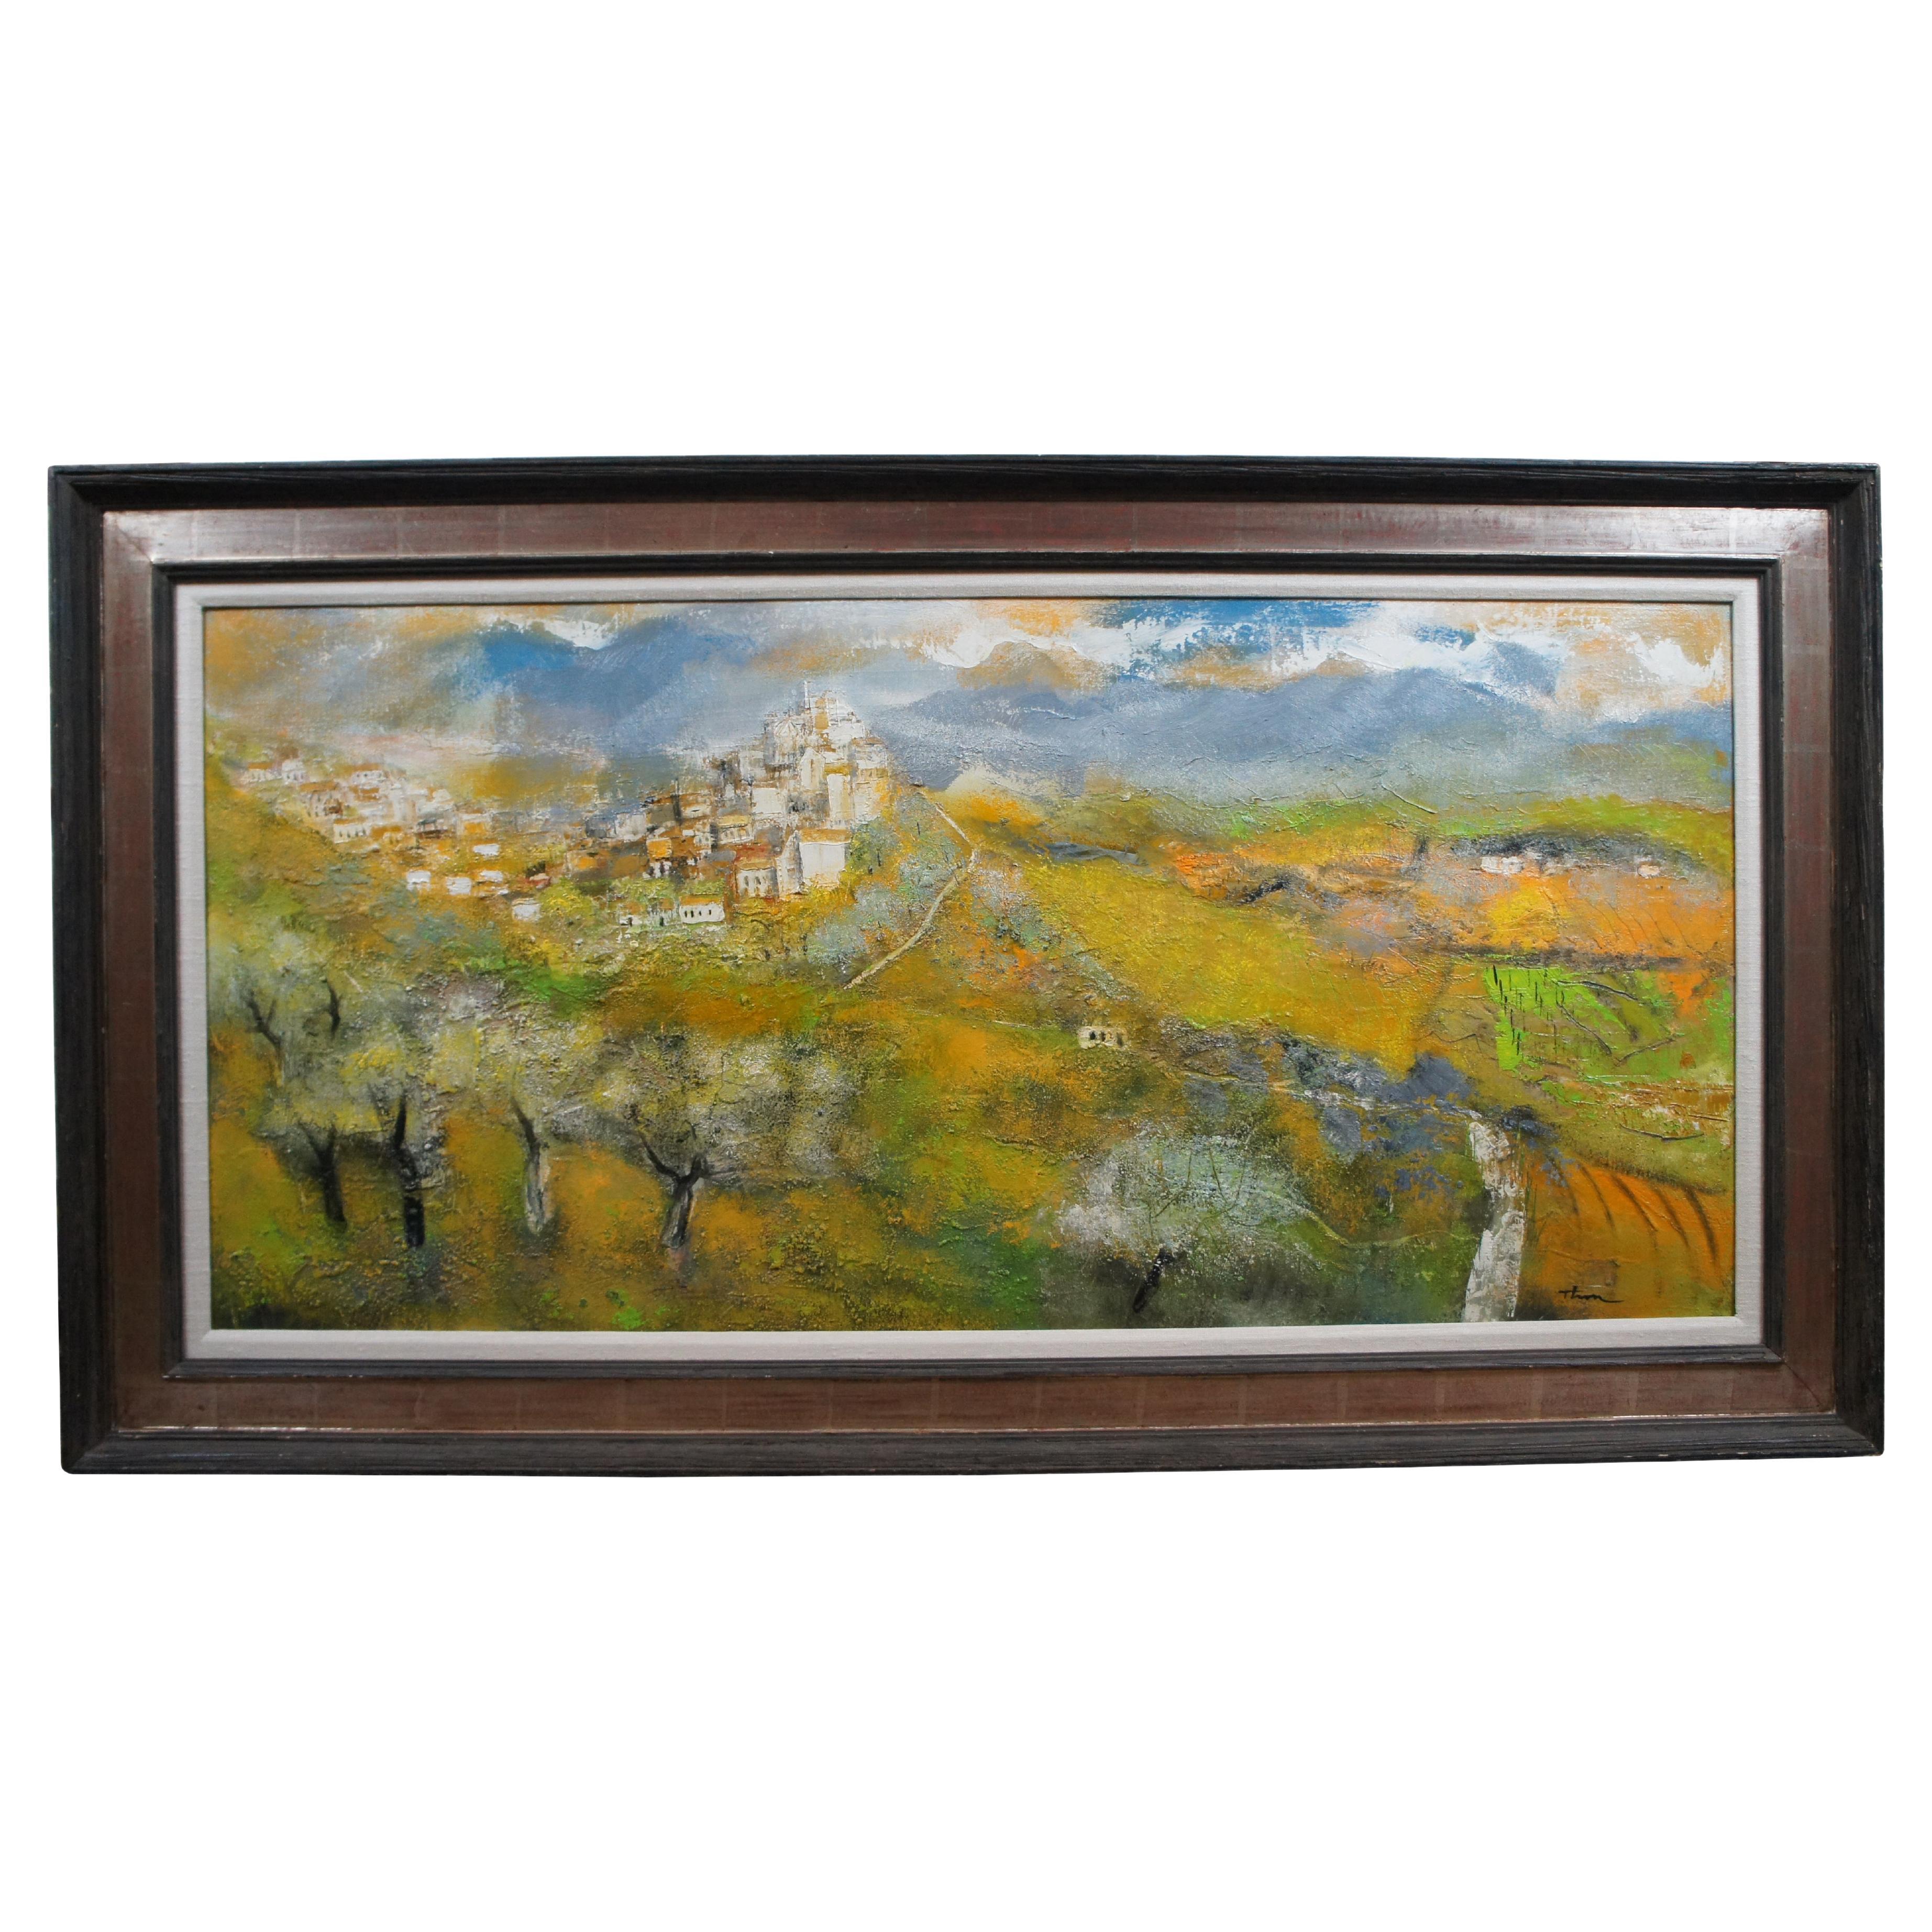 William Thon Mountain Town Calabria Italy Expressionist Oil Landscape Painting